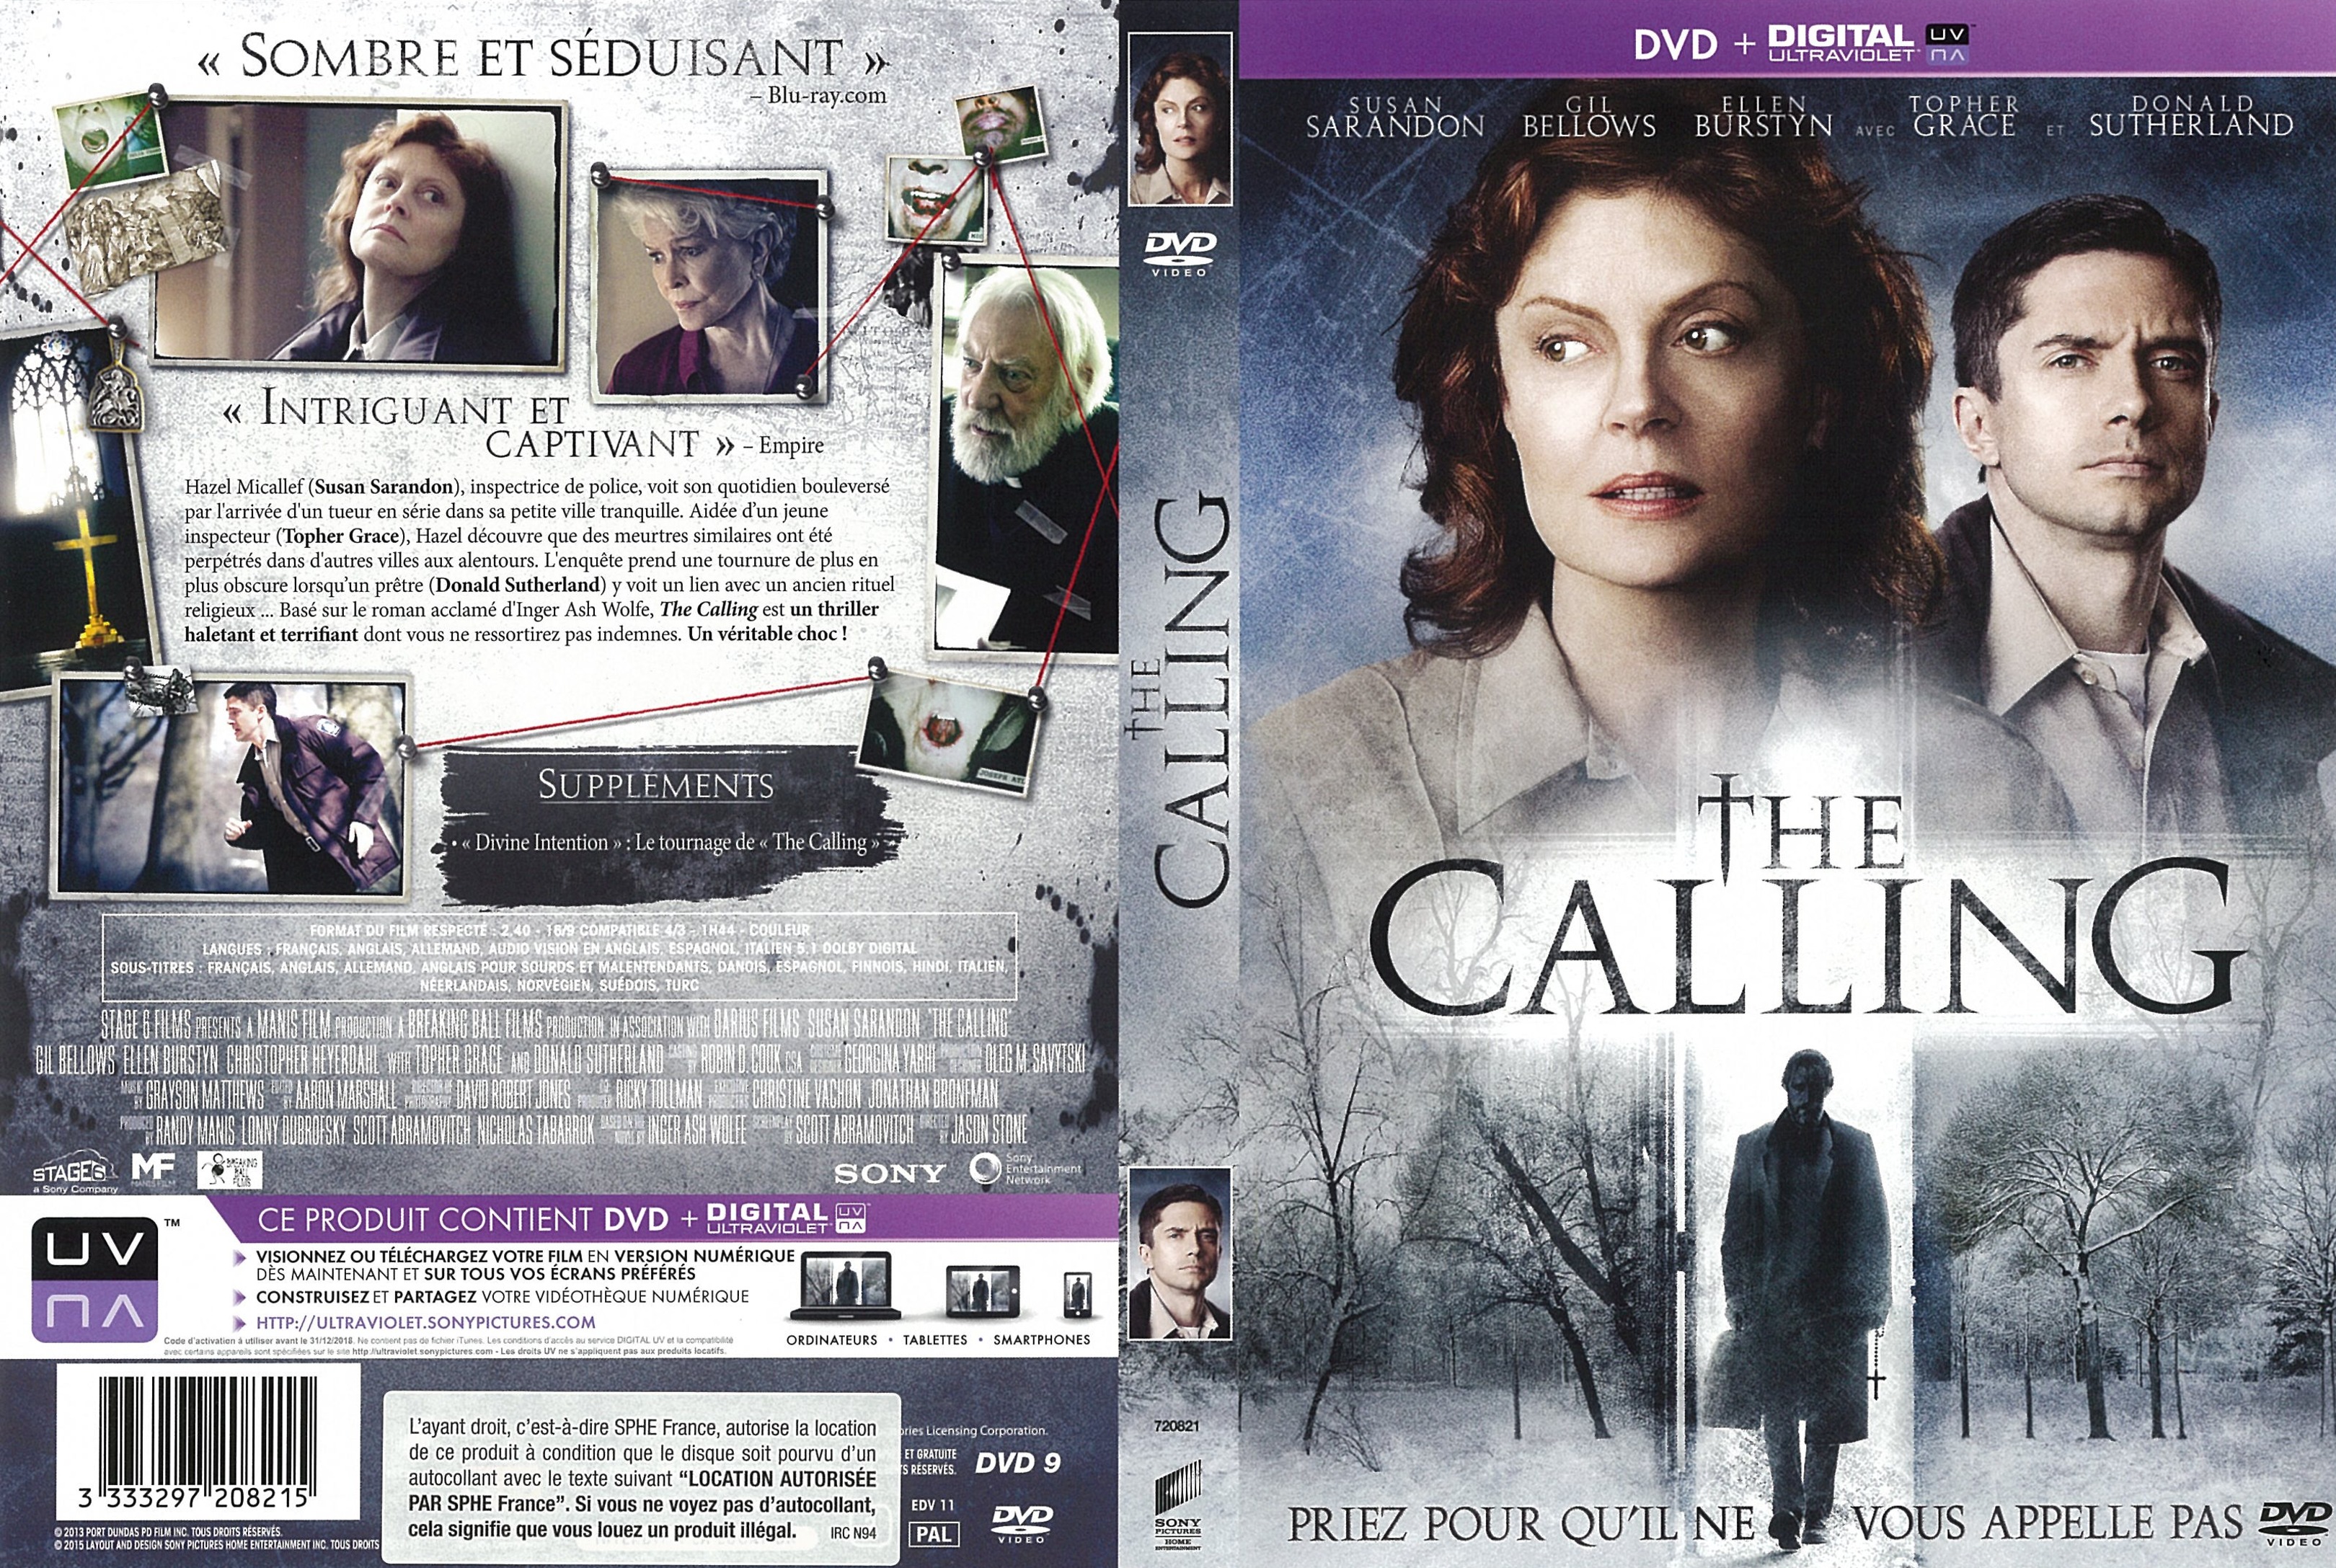 Jaquette DVD The Calling (2014)